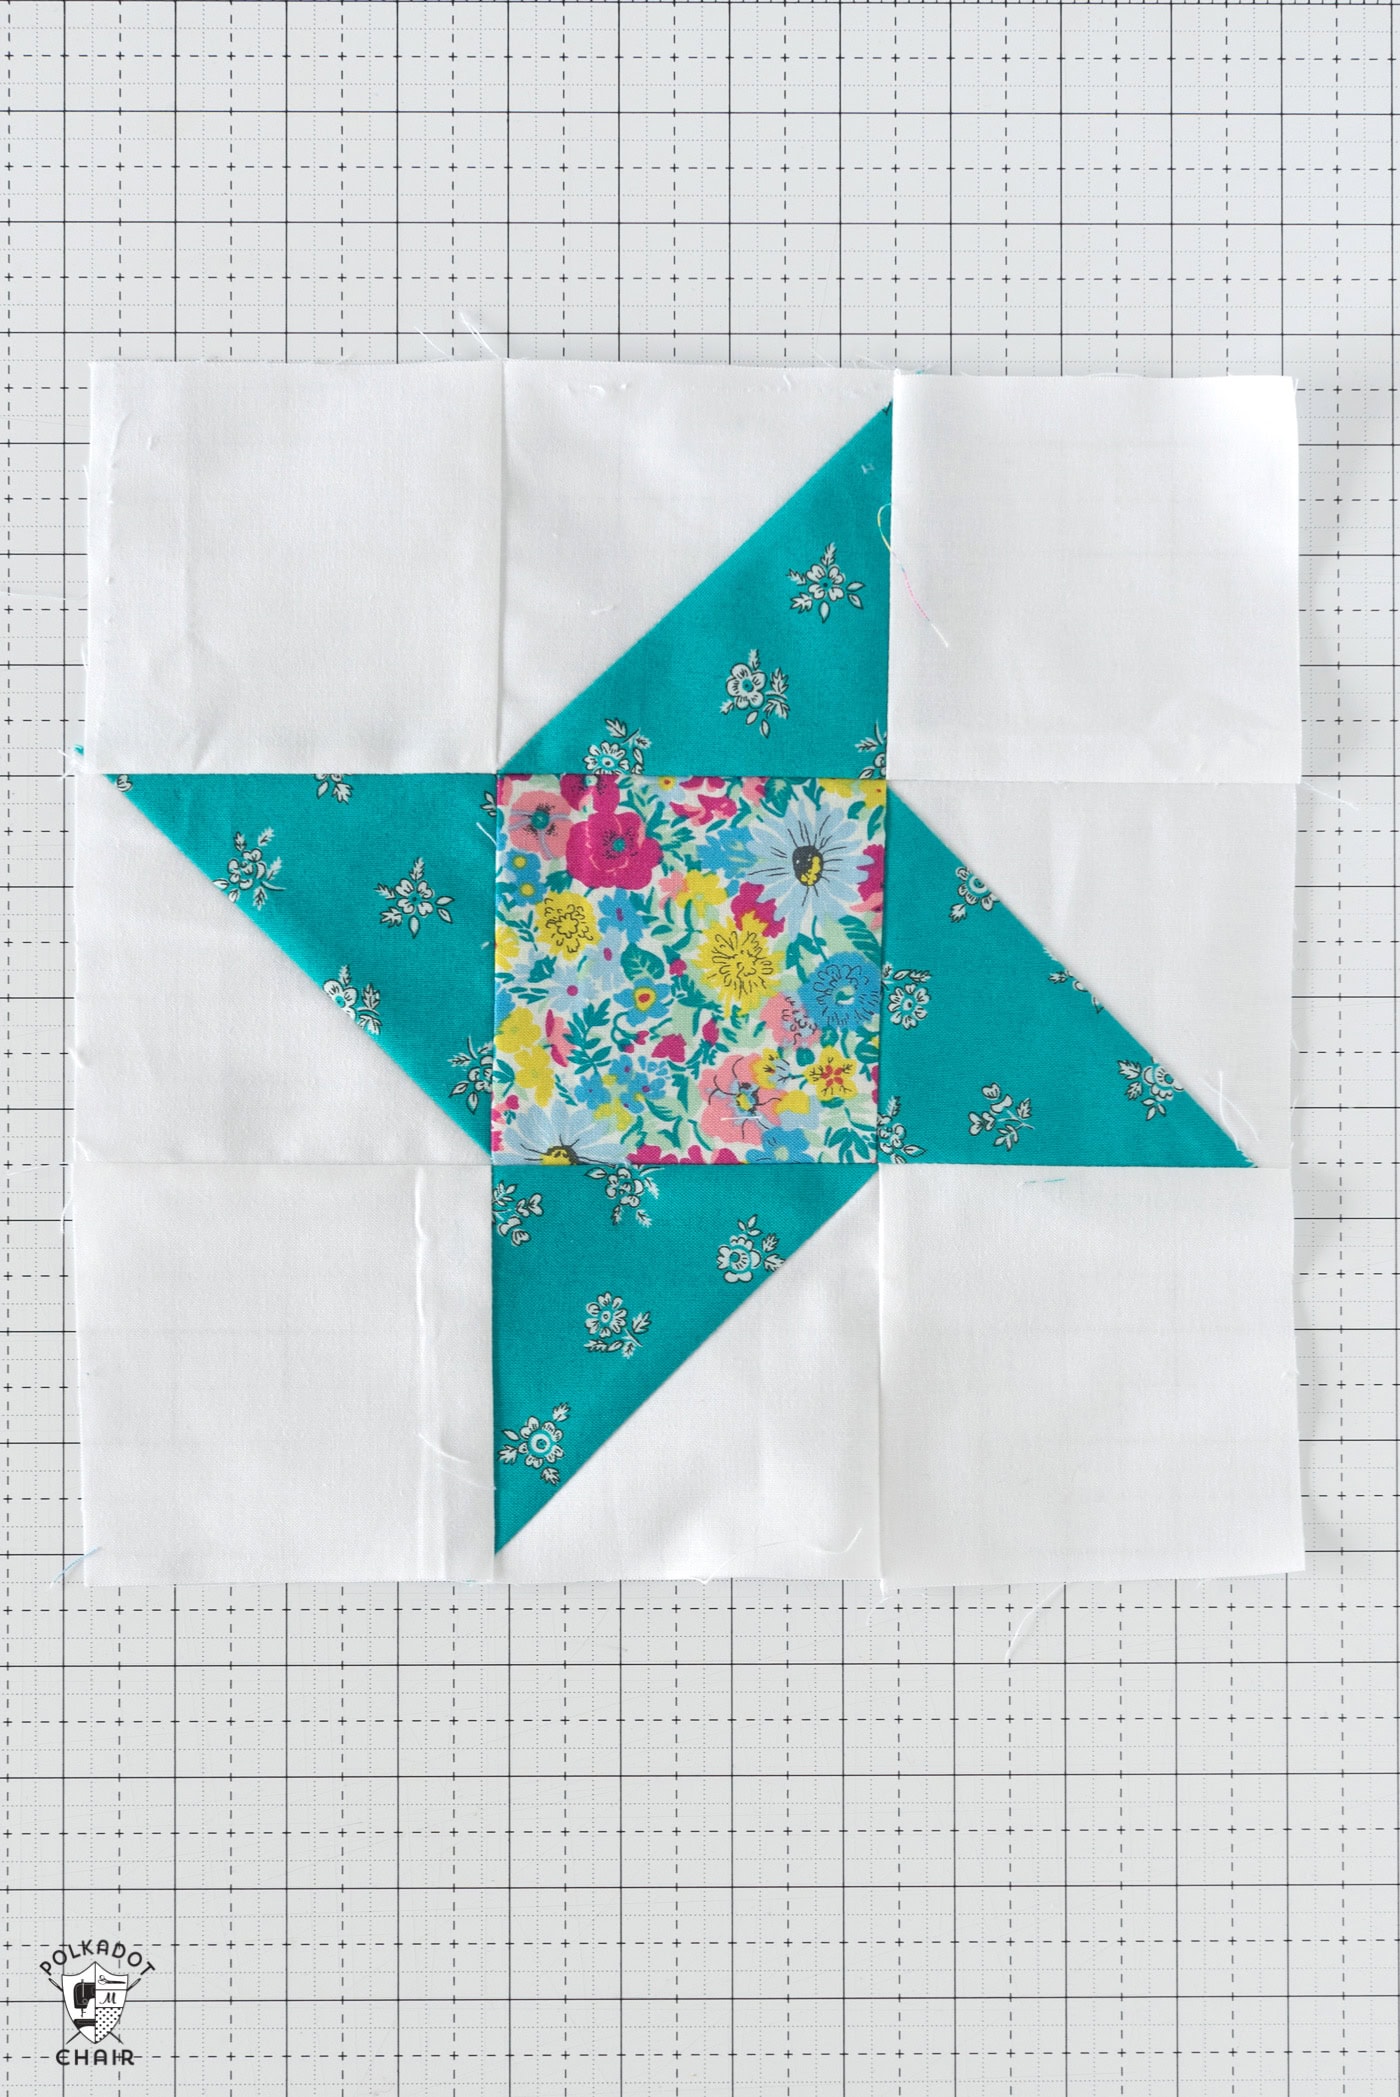 blue and floral quilt block on white cutting mat